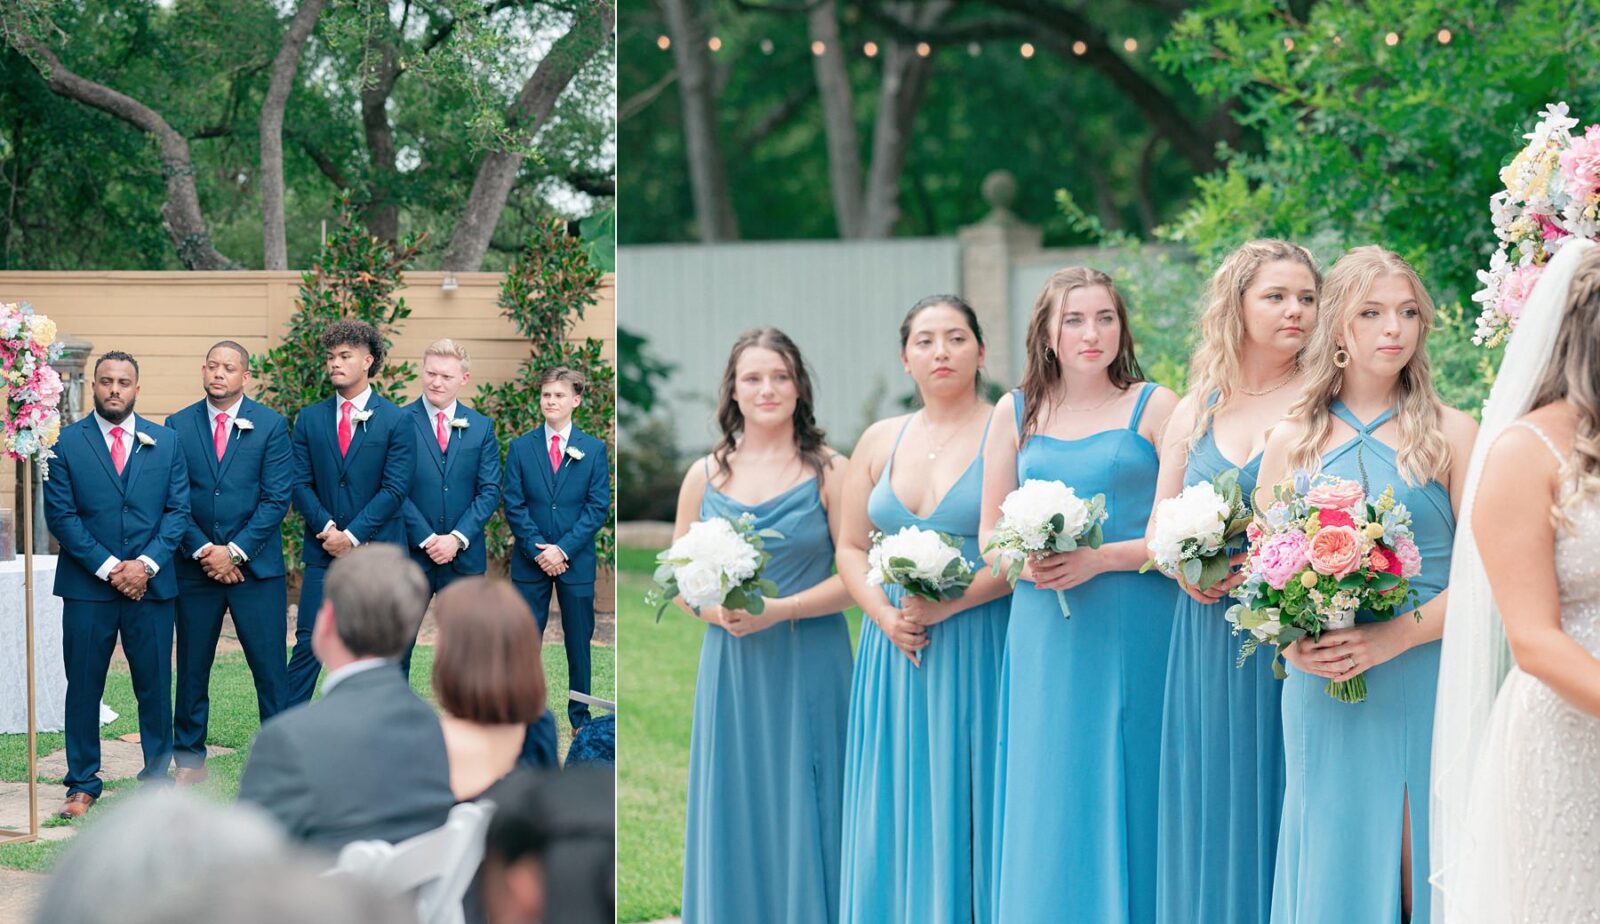 Austin Wedding at Hummingbird House, with wedding photos by Tara Lyons Photography. Other vendors: Mistique Makeup, Cana Events, Twin Flame Events, Simply Chic Event Rentals, Live Oak Photo Booth